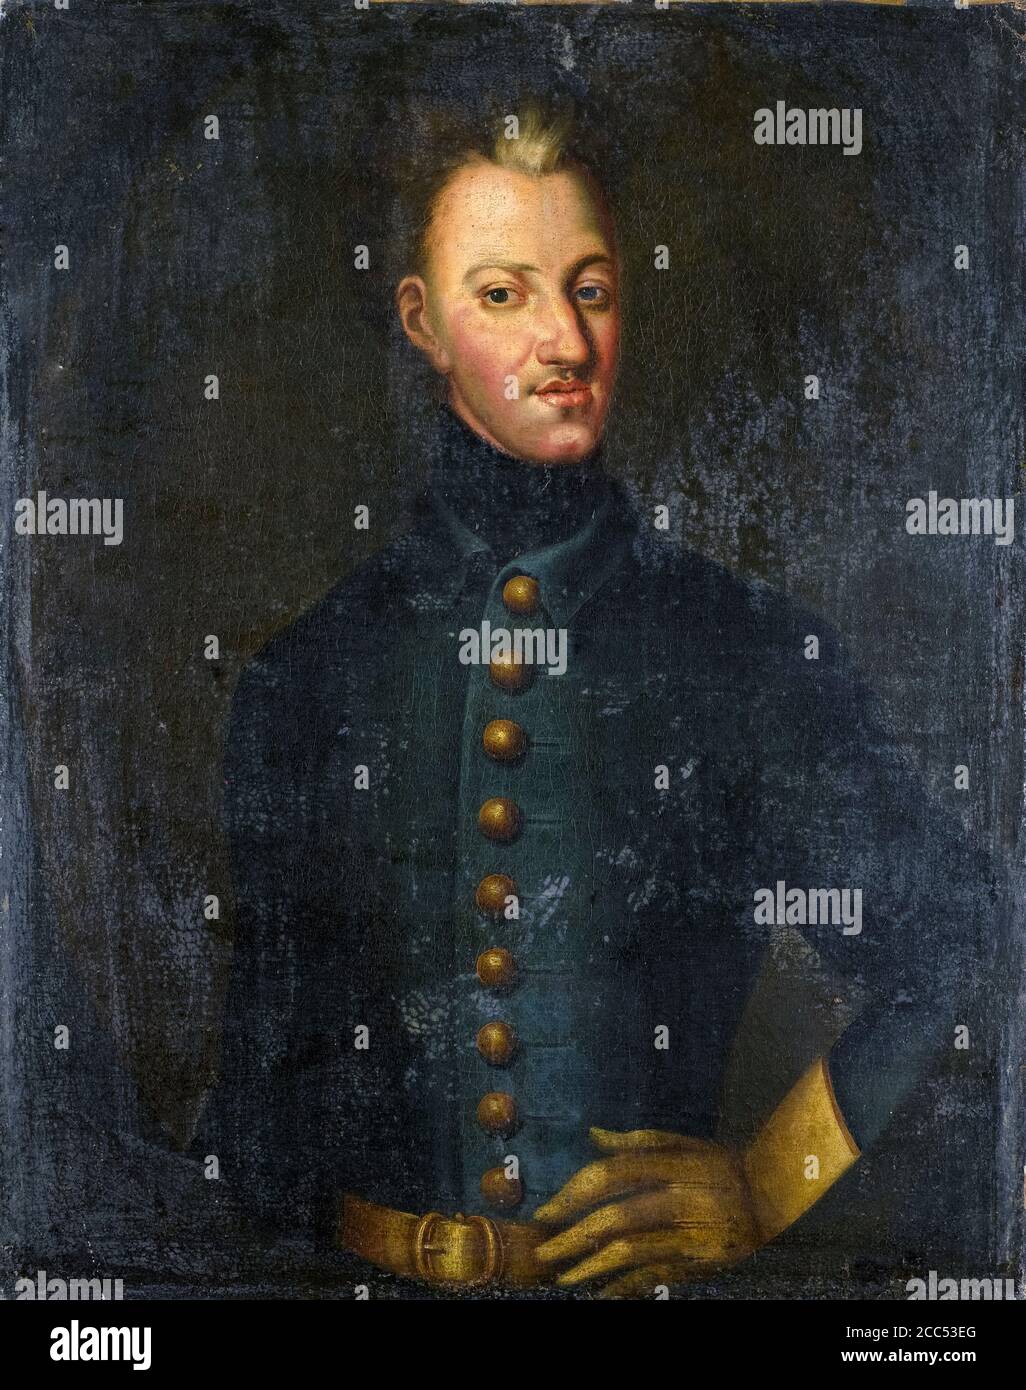 Charles XII (1682-1718), King of Sweden, portrait painting by after David von Krafft, 1700-1750 Stock Photo